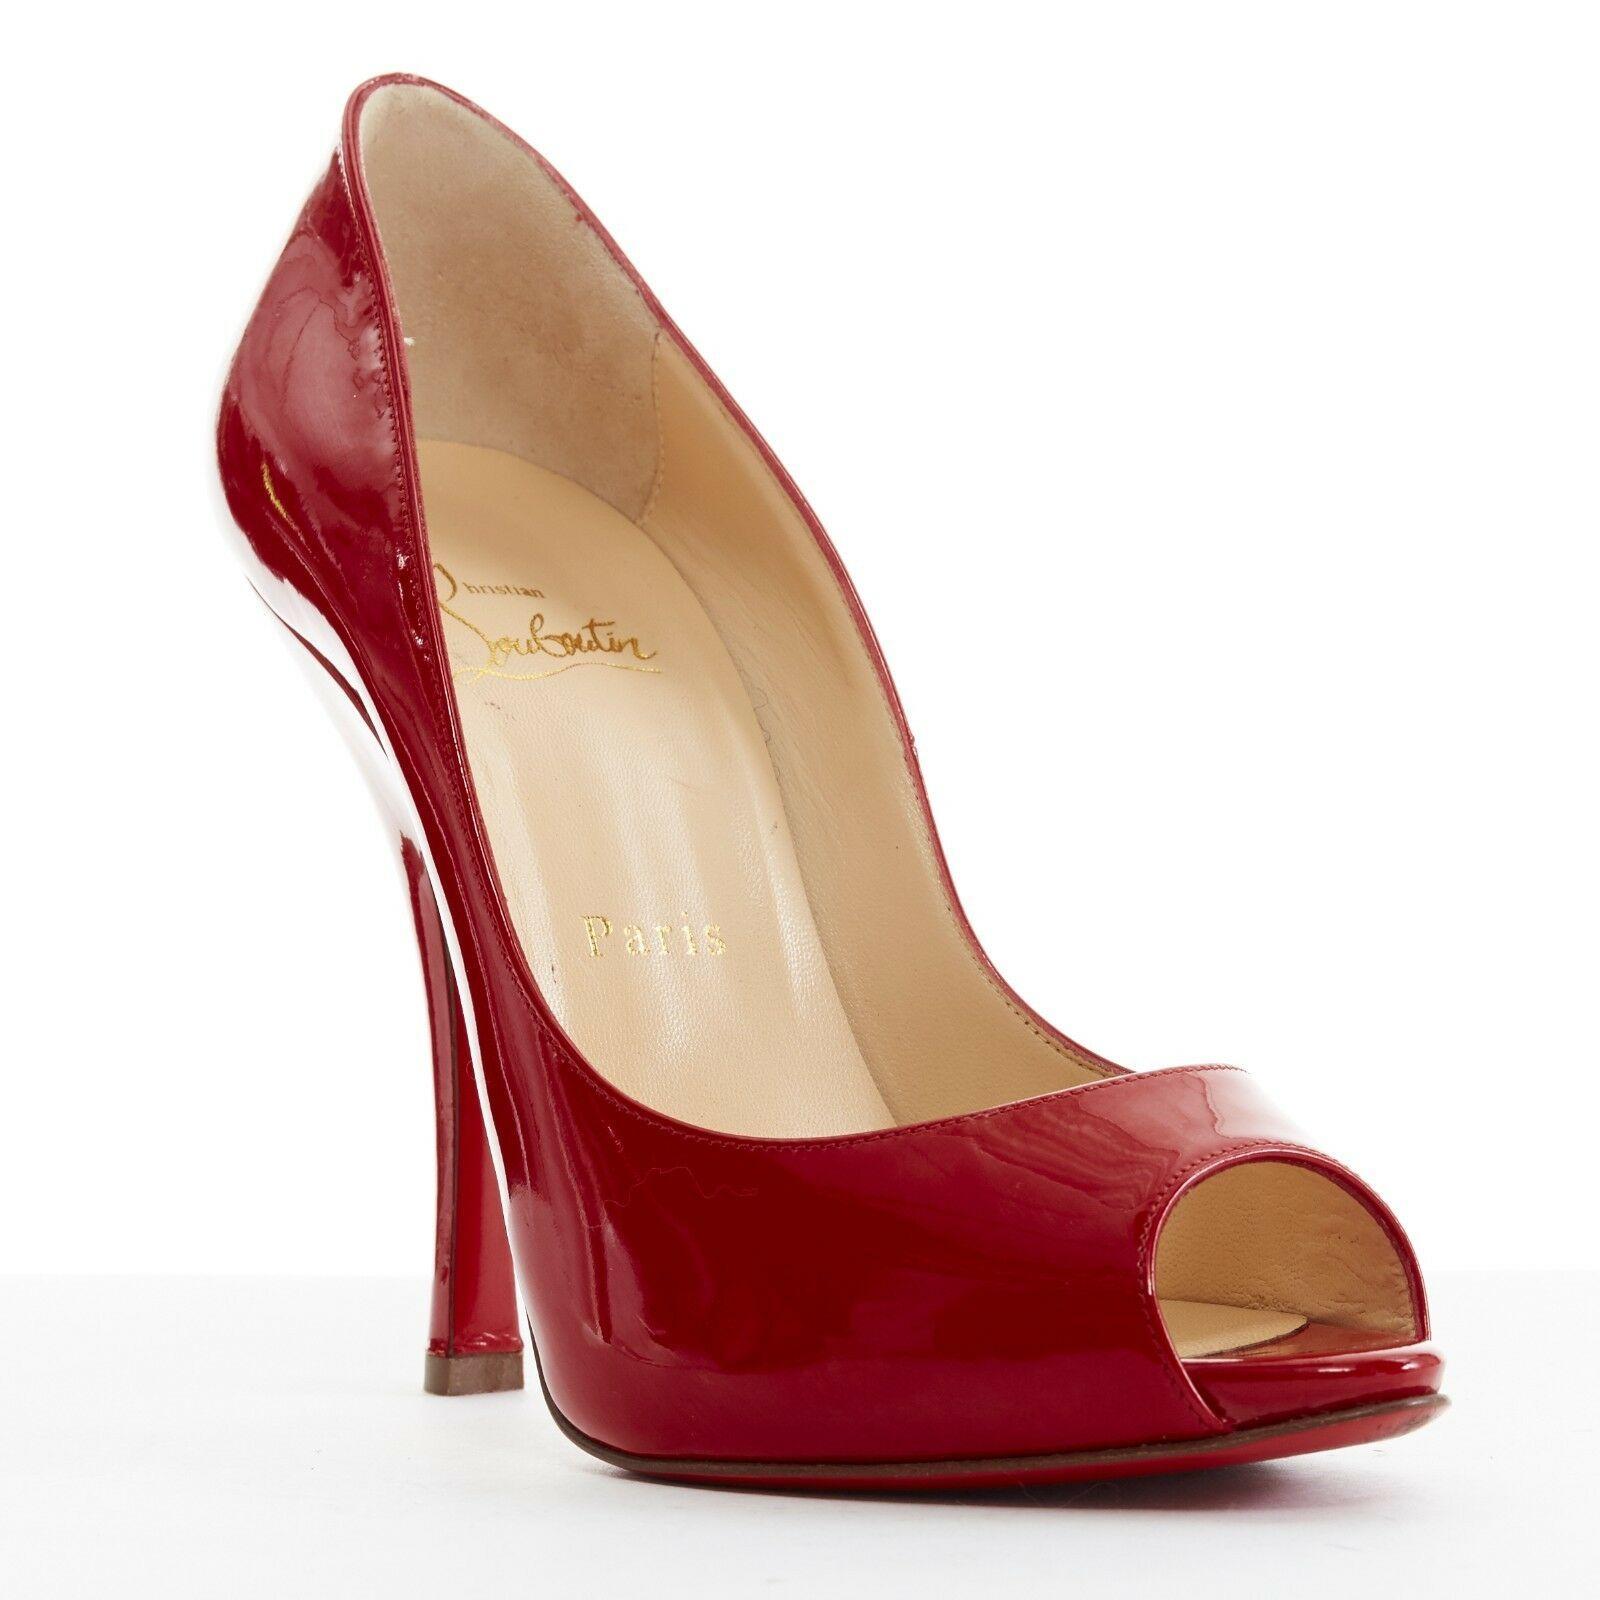 CHRISTIAN LOUBOUTIN Maryl 120 red patent curved heel peeptoe heels EU37.5 US7.5
CHRISTIAN LOUBOUTIN
Maryl 120. 
Red patent. 
Peep toe. 
Covered heel. 
Curved thick heel.
Tan leather lining. 
Signature Christian Louboutin red lacquered leather sole.